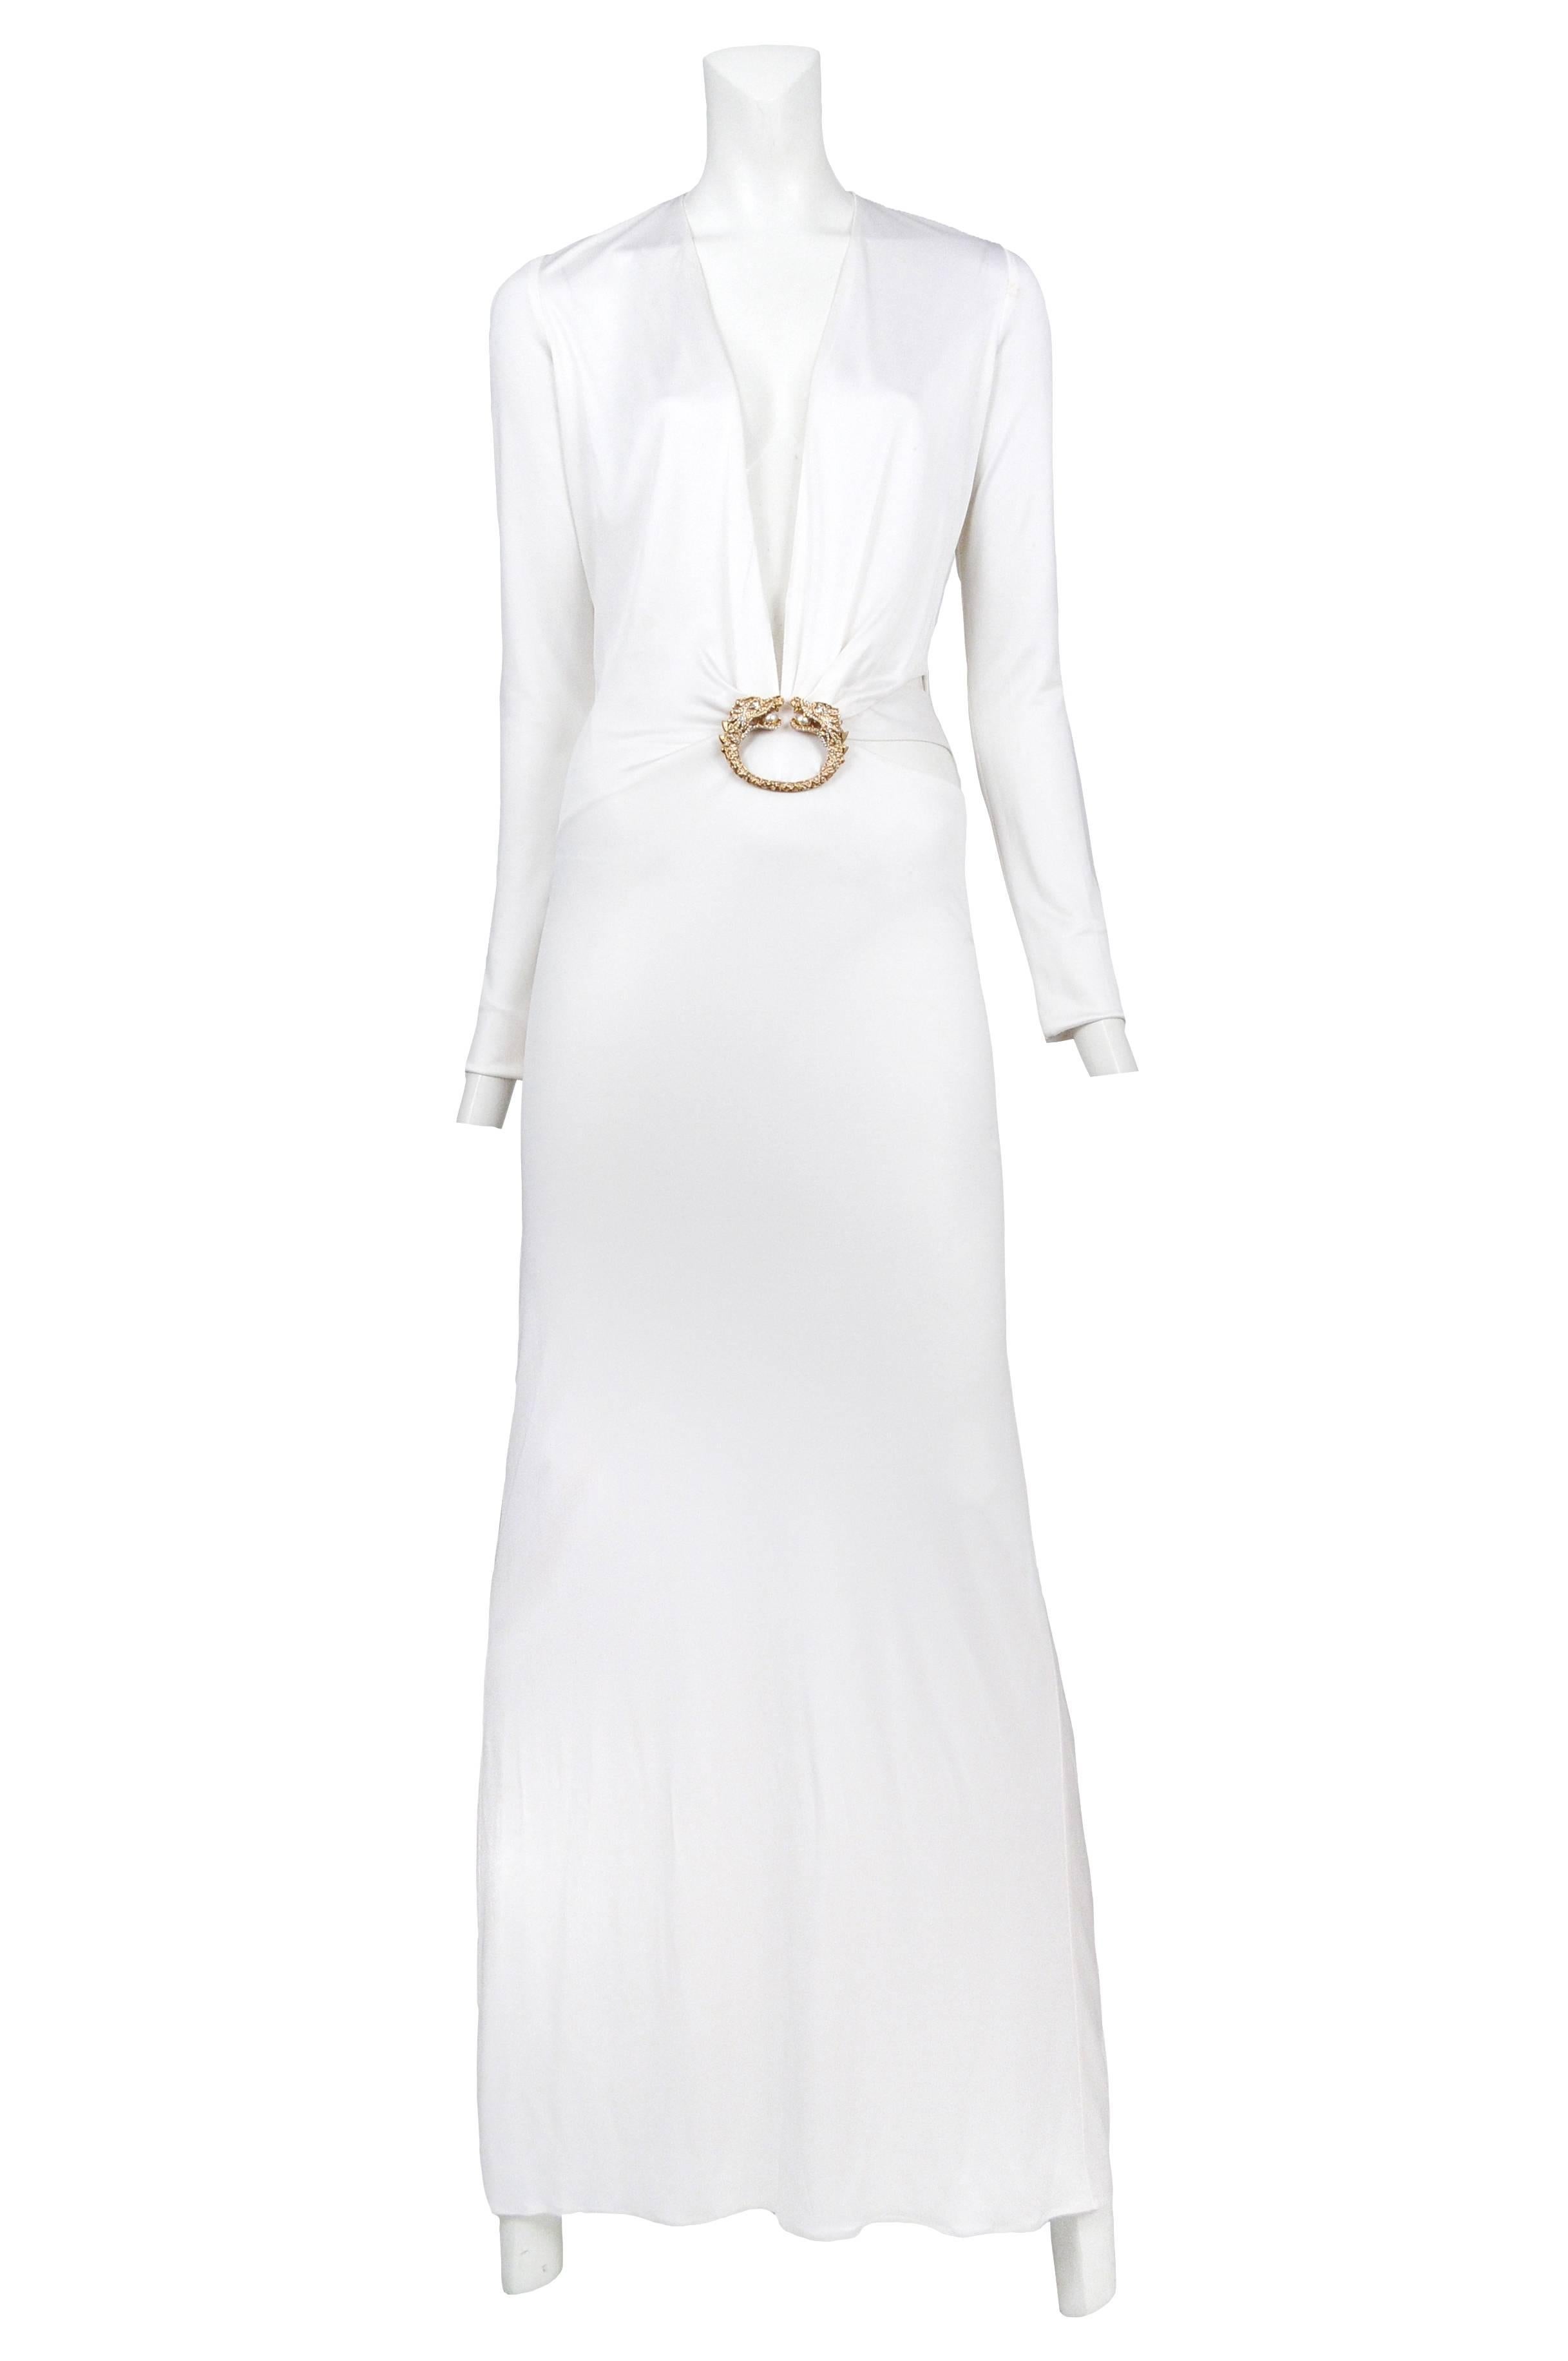 Vintage Tom Ford for Gucci white iconic gown featuring plunging neckline, double headed dragon adornment at center waist and a cutout at hip. Runway piece from the Fall 2004 collection. Please contact for additional photos. 